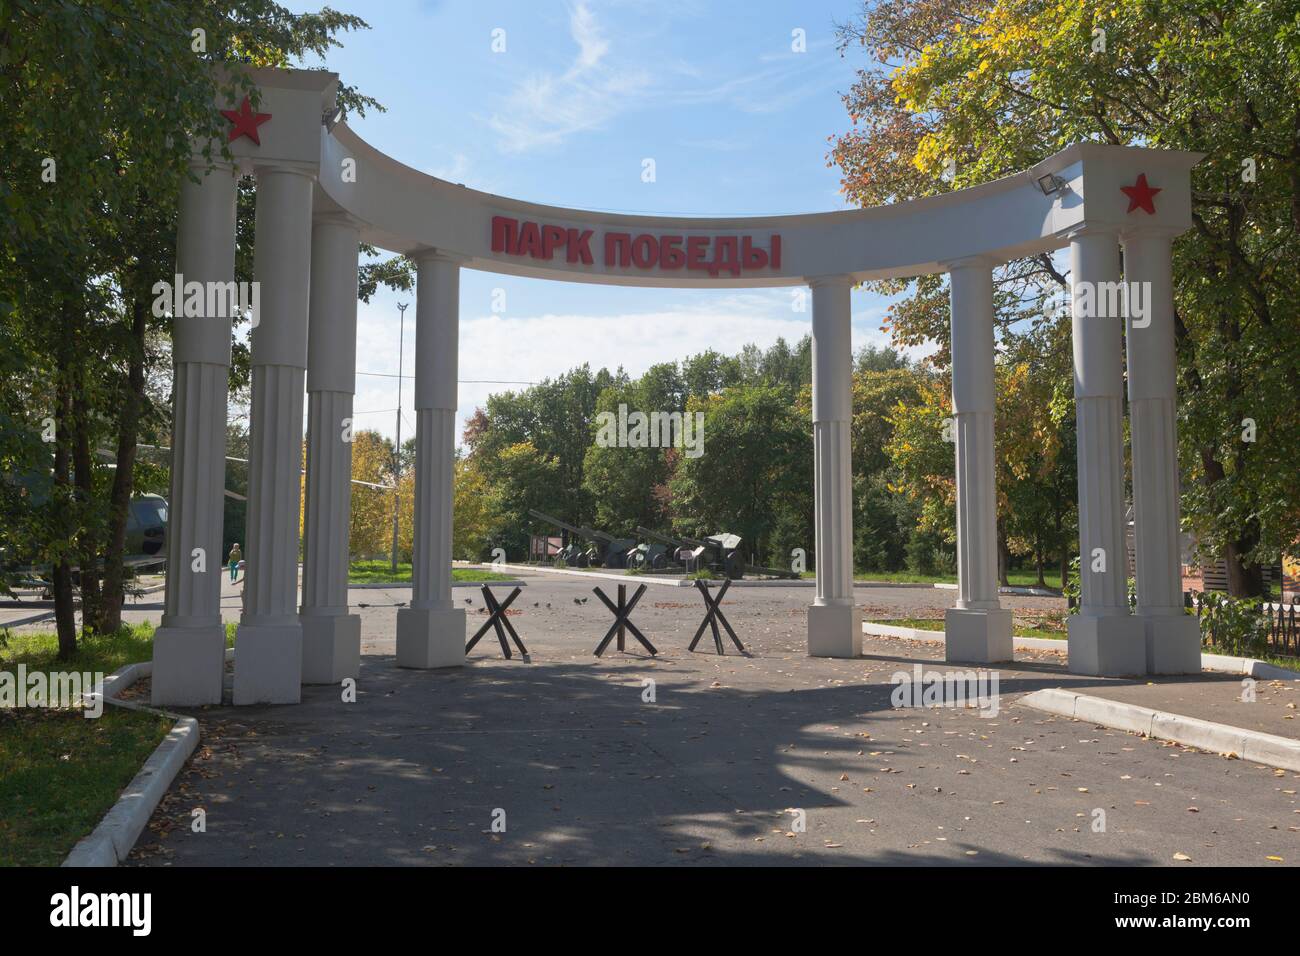 Vologda, Russia - August 20, 2019: Colonnade at the entrance to Victory Park in the city of Vologda Stock Photo